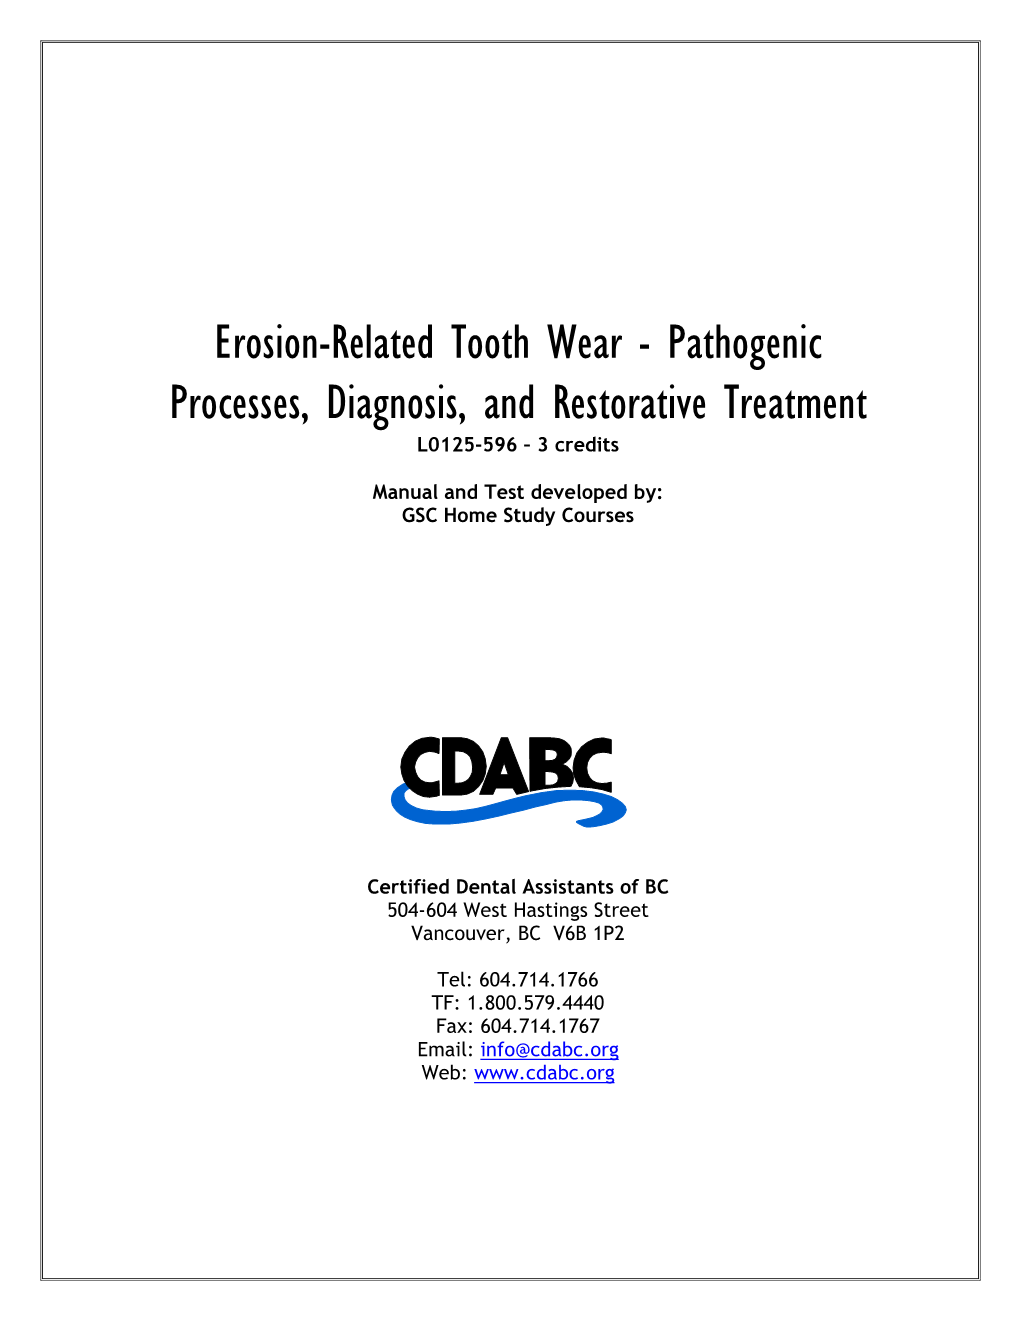 Erosion-Related Tooth Wear - Pathogenic Processes, Diagnosis, and Restorative Treatment L0125-596 – 3 Credits